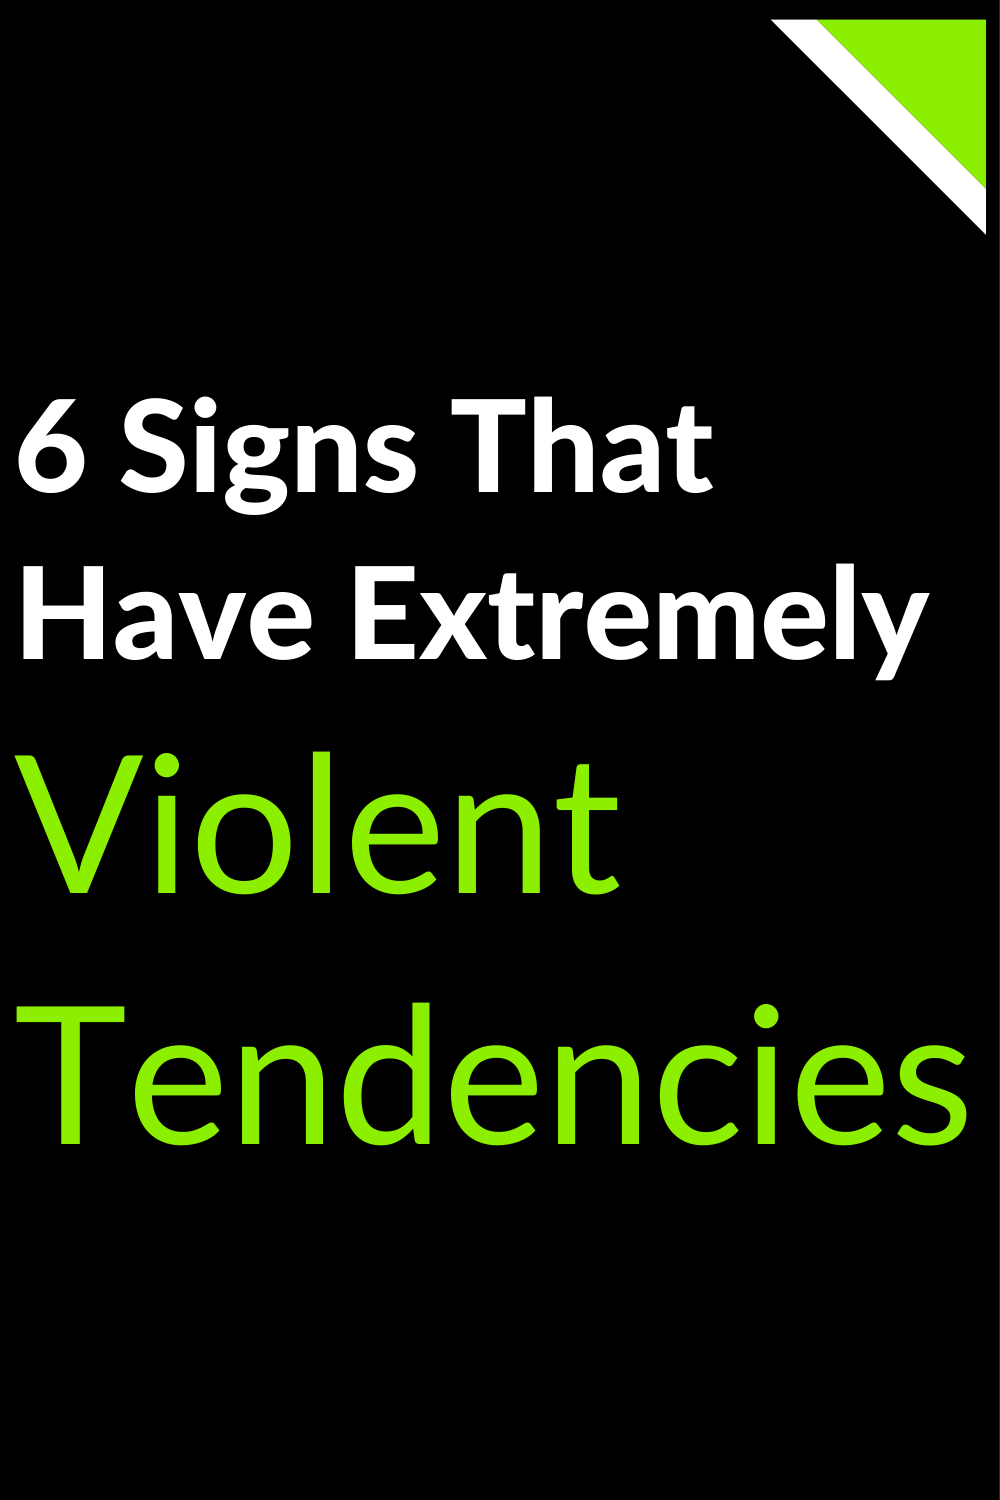 6 Signs That Have Extremely Violent Tendencies